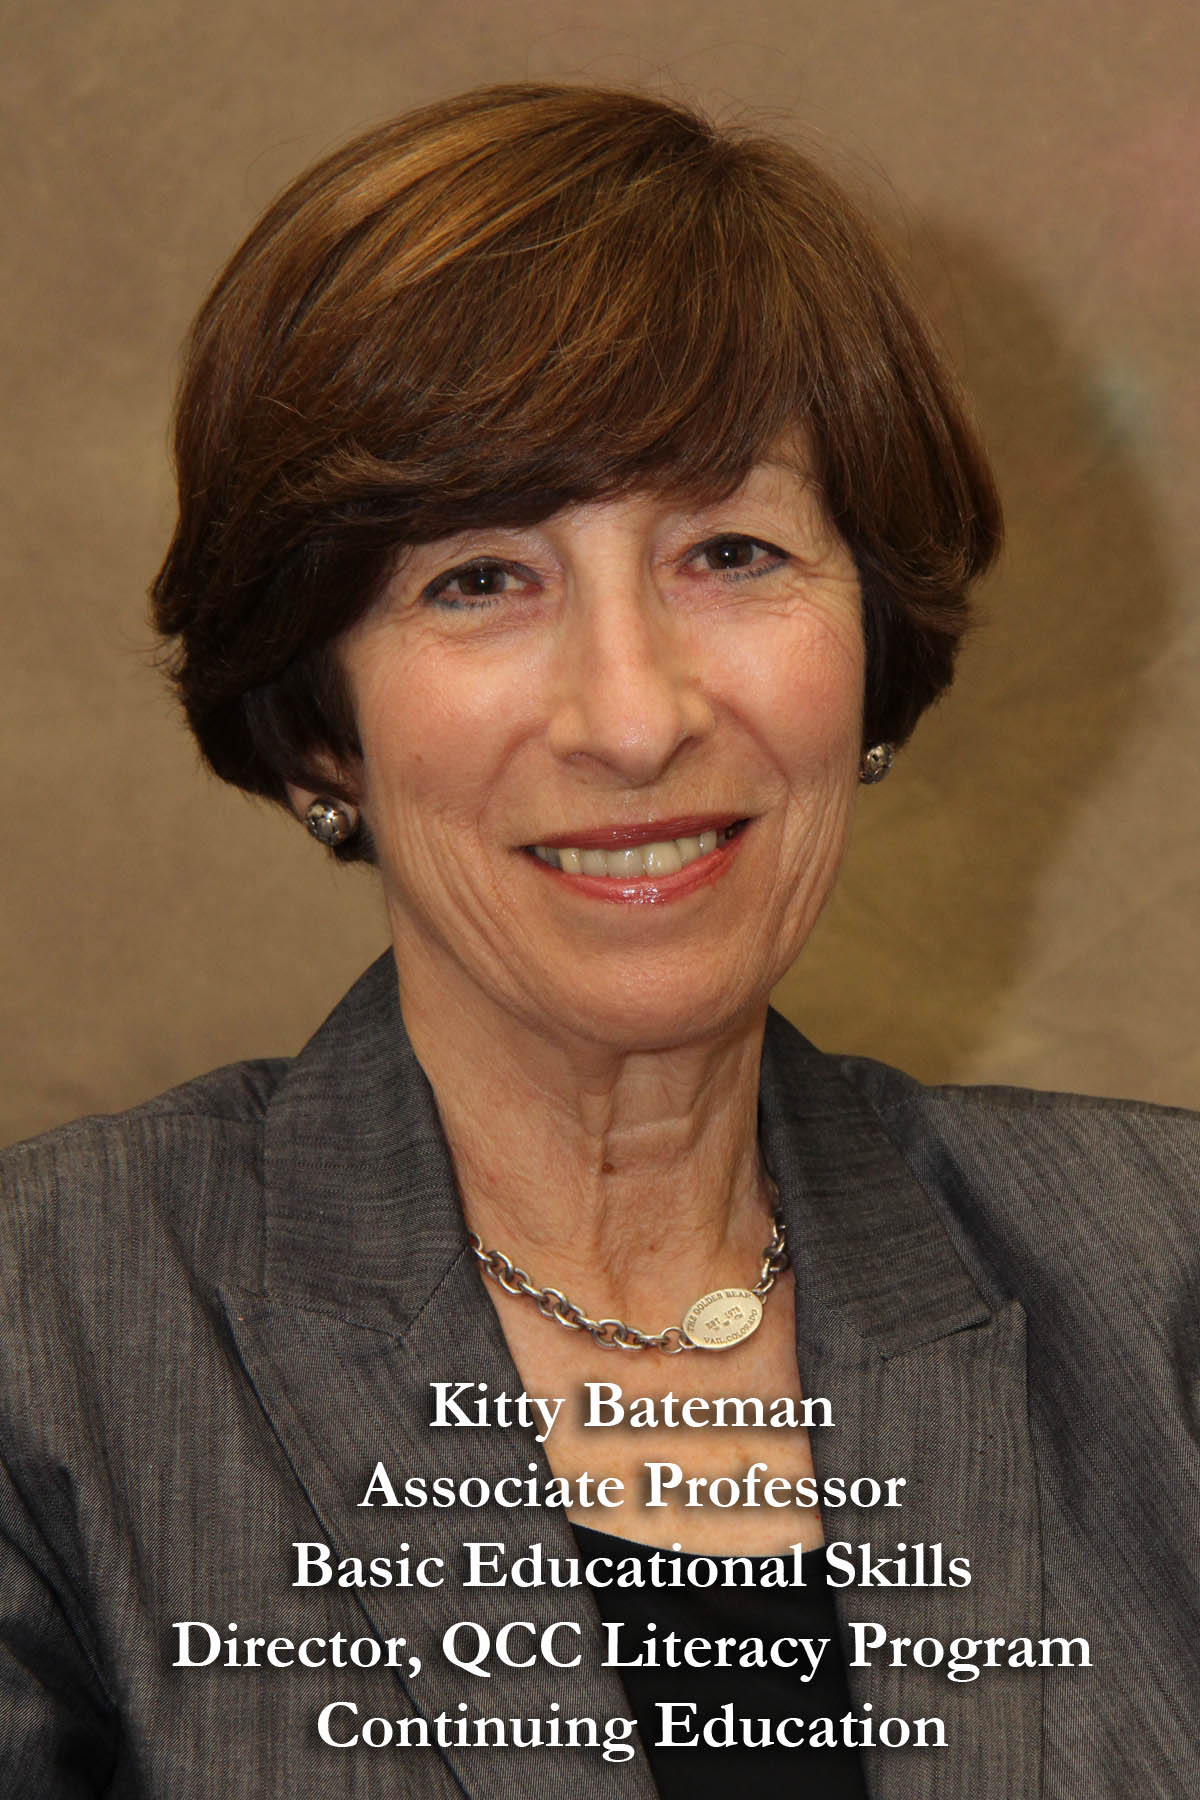 image of Kitty Bateman, Assistant Professor, Director of the QCC Literacy Program